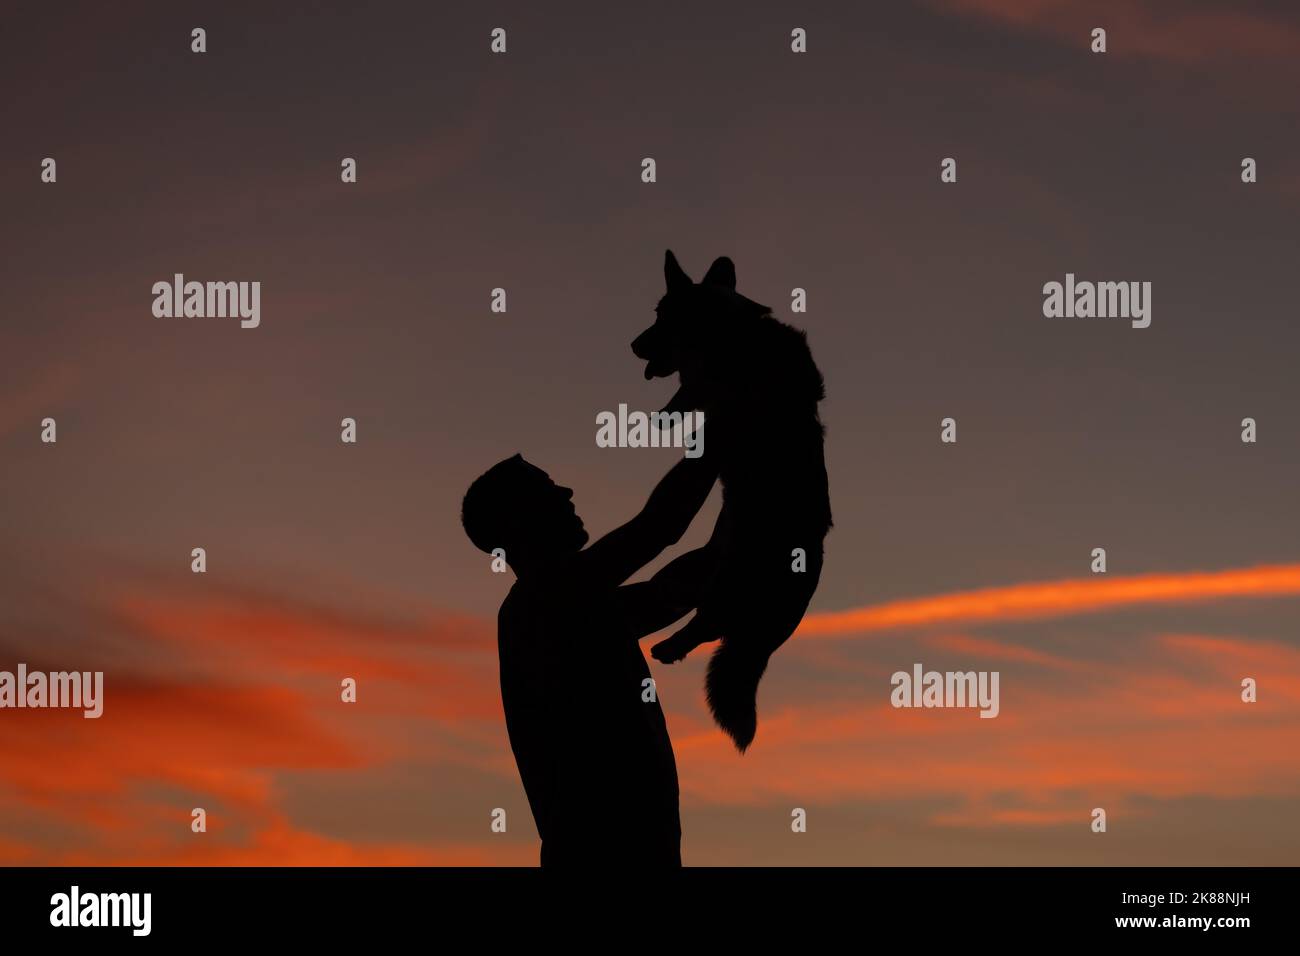 Silhouette of man holding his lovely corgi dog in arms at sunset. Pet and owner or master friendship. Love animals concept. Stock Photo